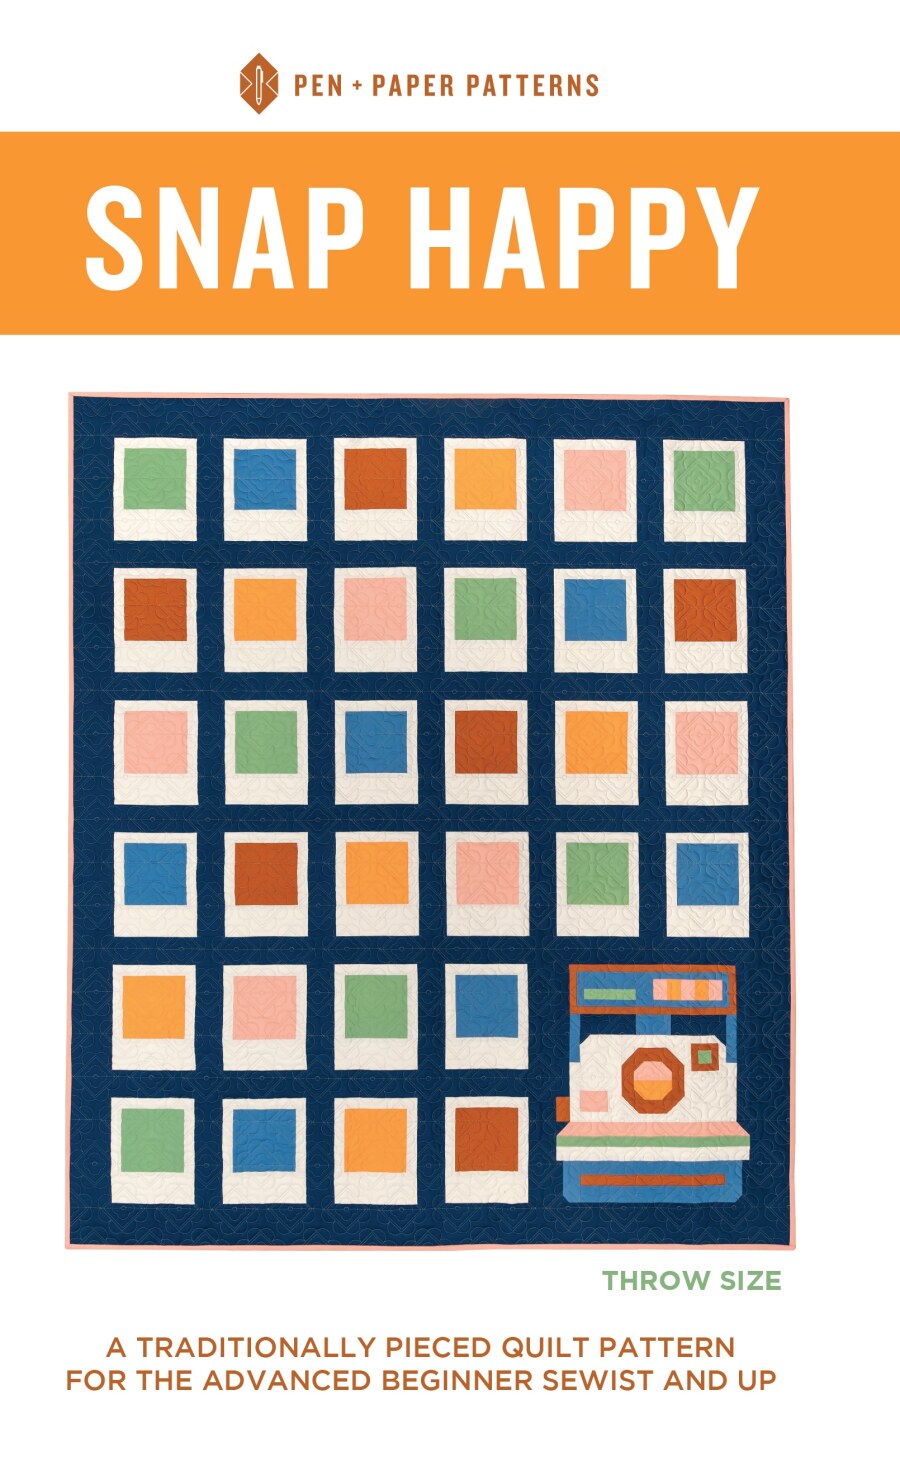 Snap Happy Quilt Pattern by Pen + Paper